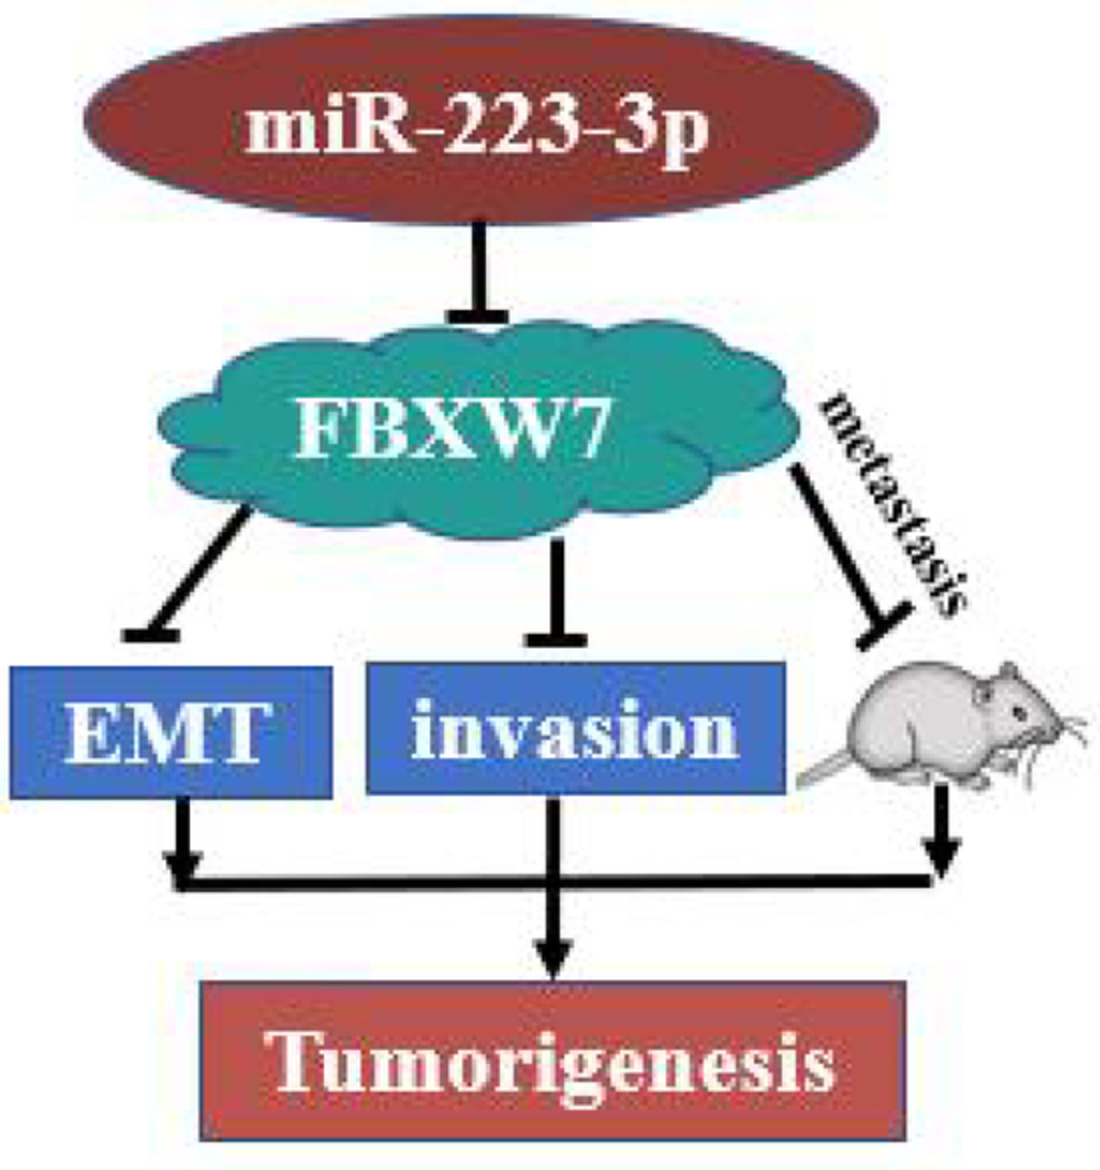 miR‐223‐3p targets FBXW7 to promote epithelial‐mesenchymal transition and metastasis in breast cancer